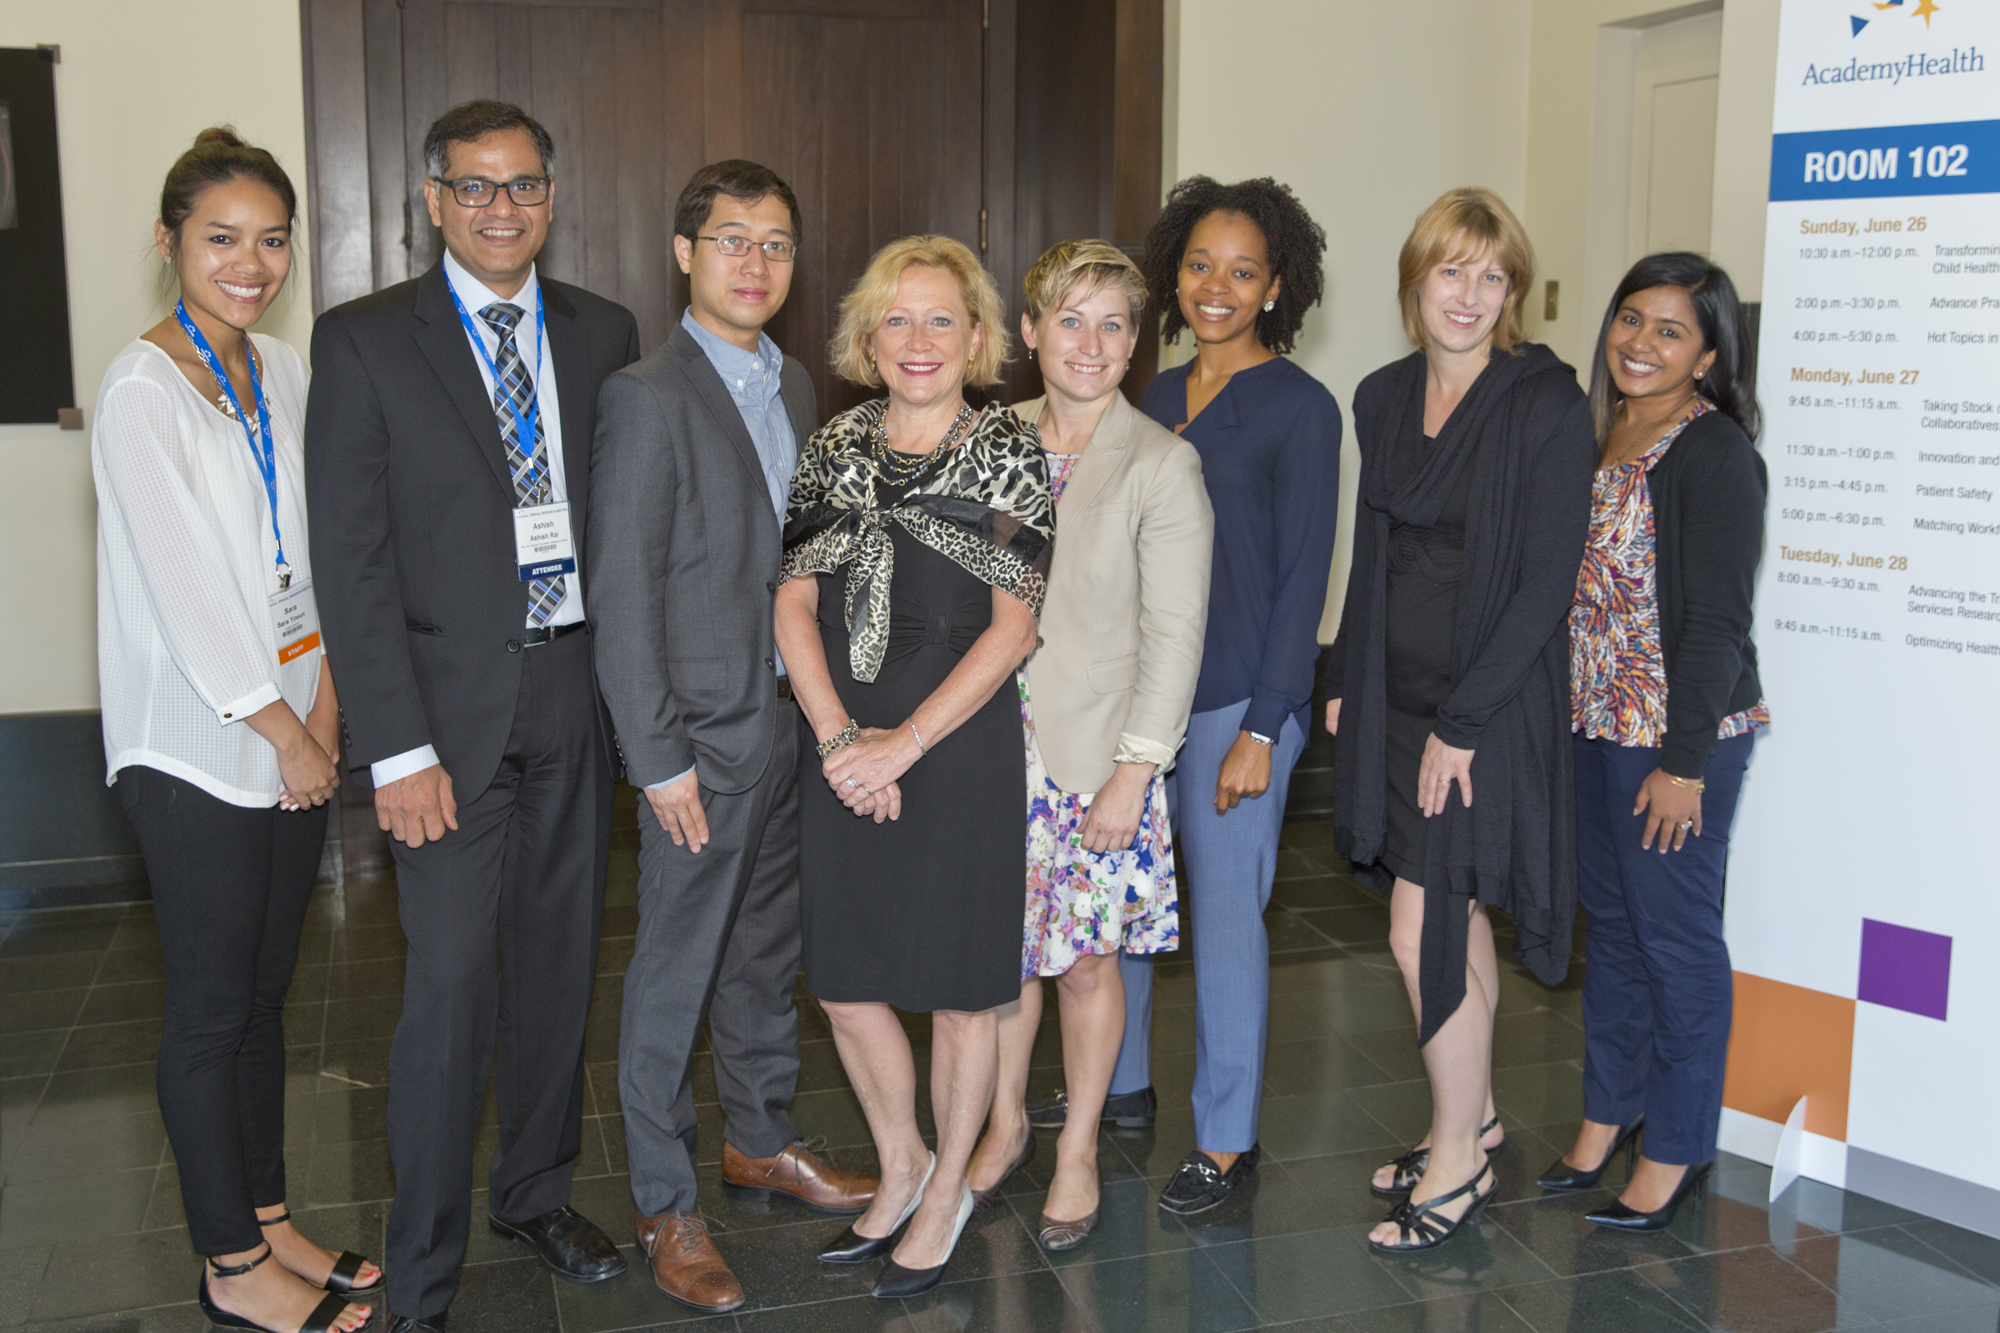 2015 dssf fellows group photo with academyhealth staff at the annual research meeting